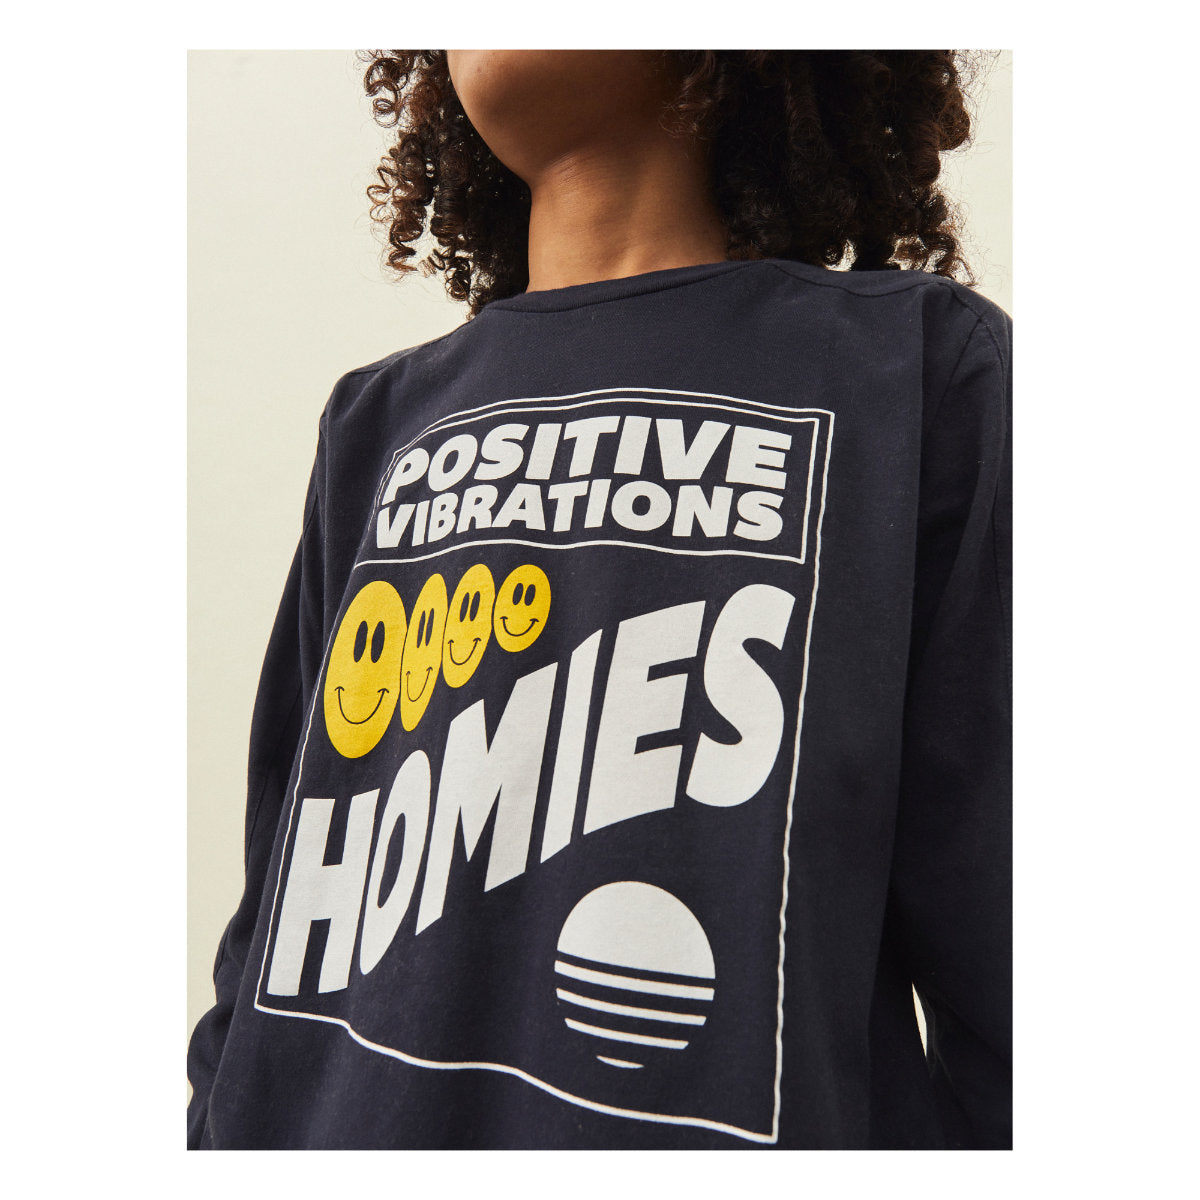 Hundred Pieces Homies Long Sleeves T-Shirt navy blue